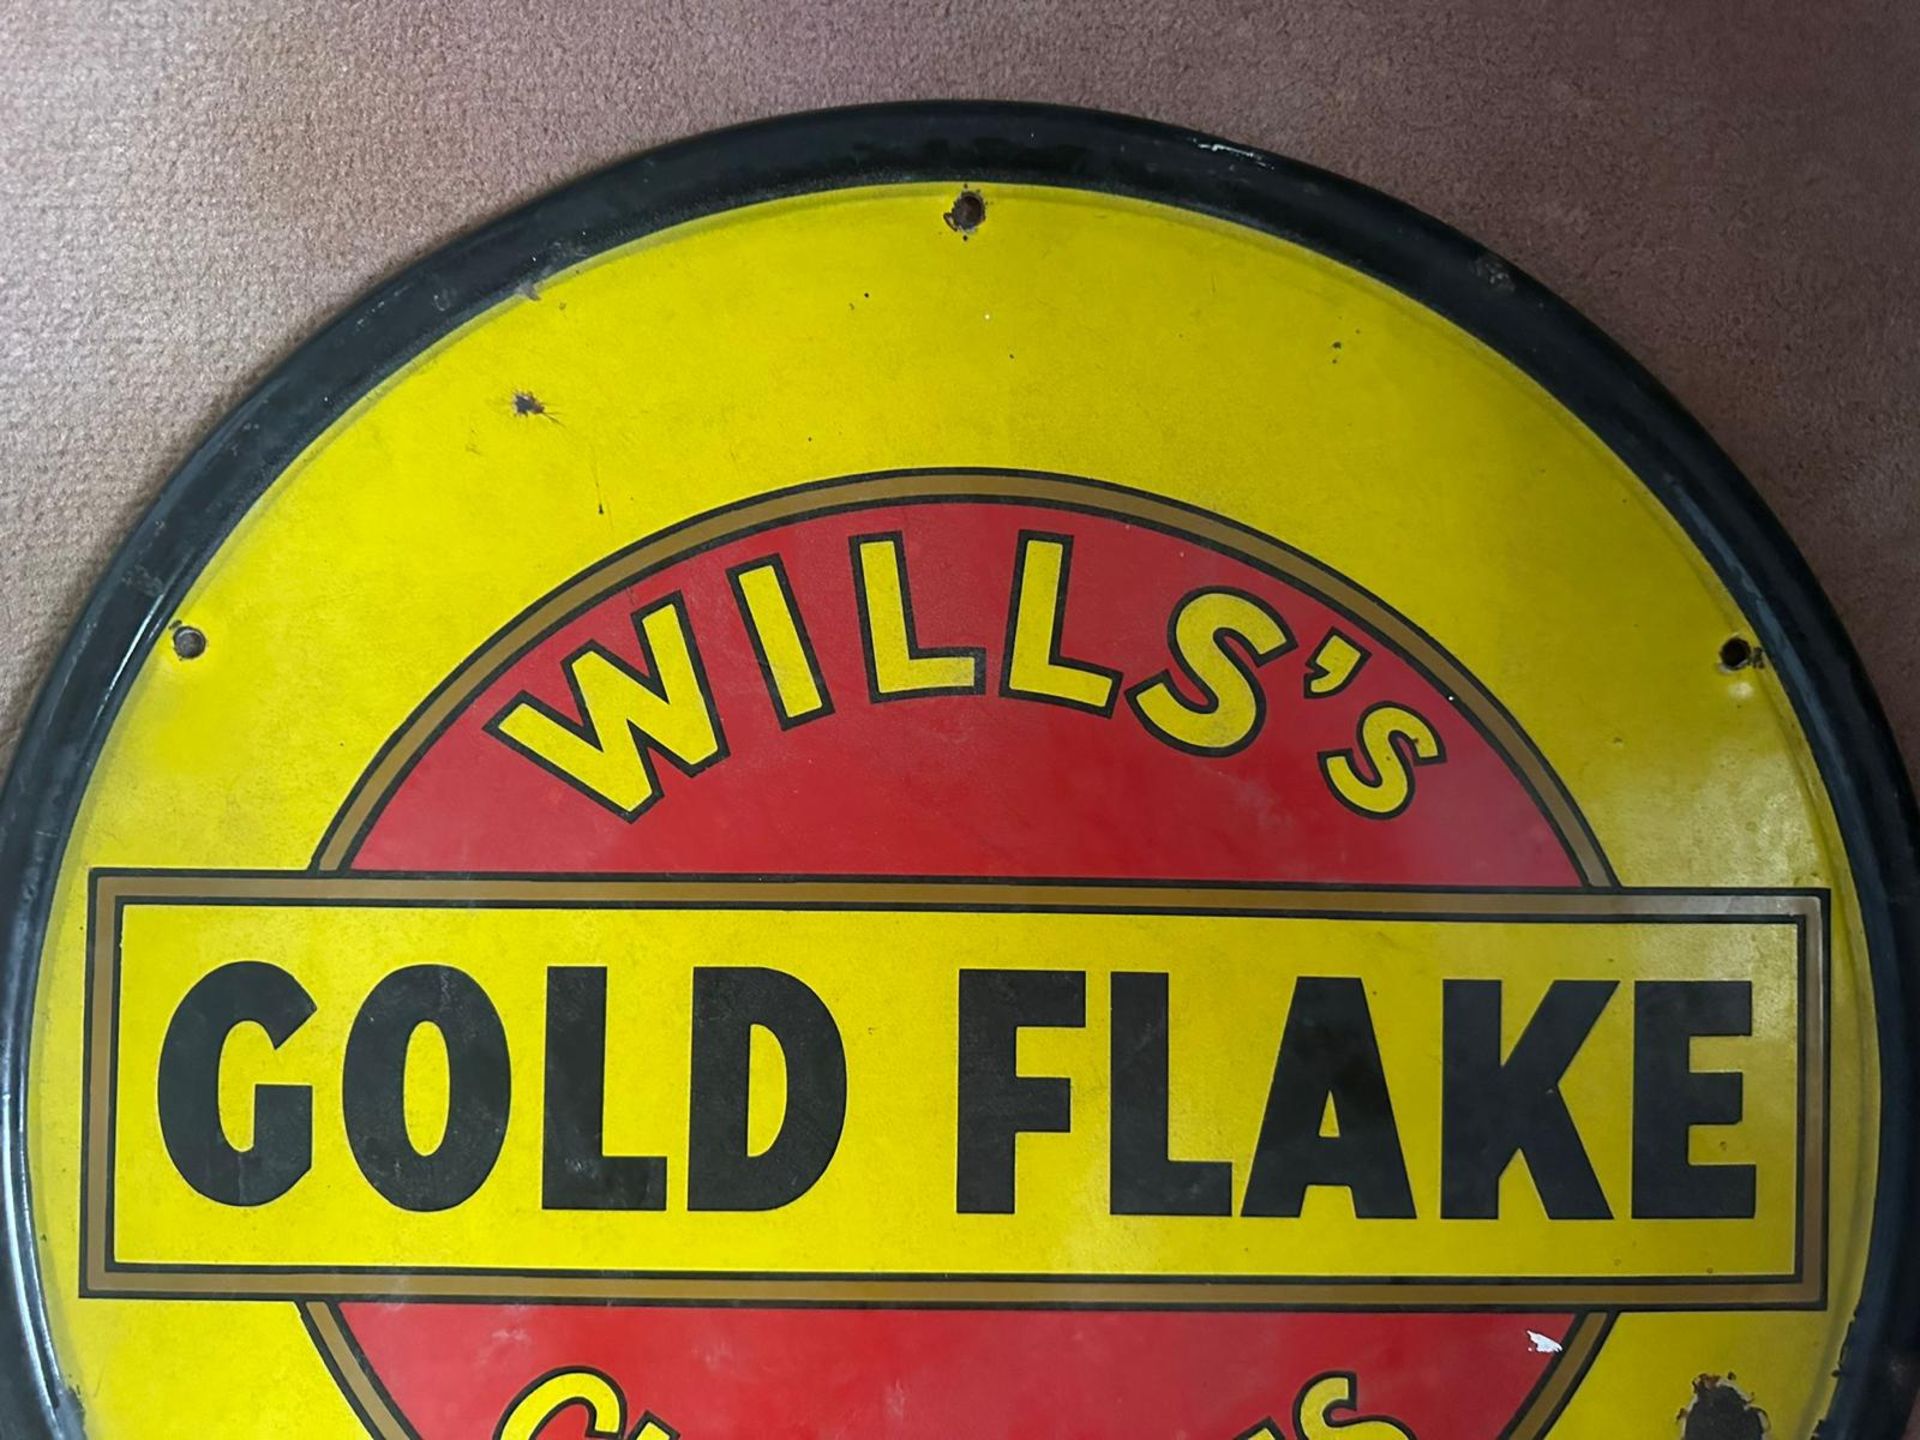 A vintage enamelled circular roundel advertising sign for Will's Gold Flake Cigarettes, - Image 5 of 9